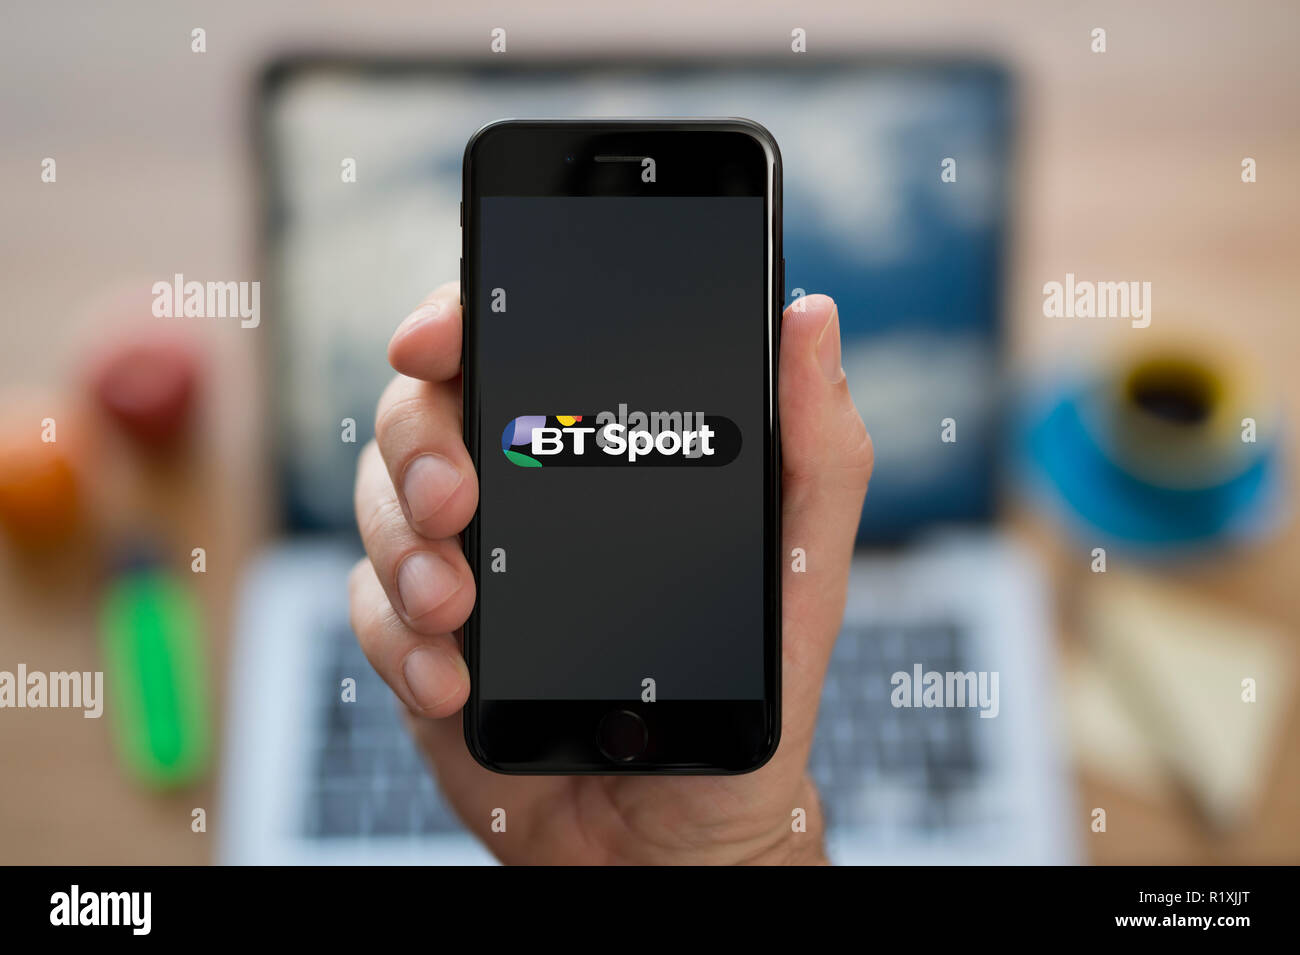 A man looks at his iPhone which displays the BT Sport logo, while sat at his computer desk (Editorial use only). Stock Photo